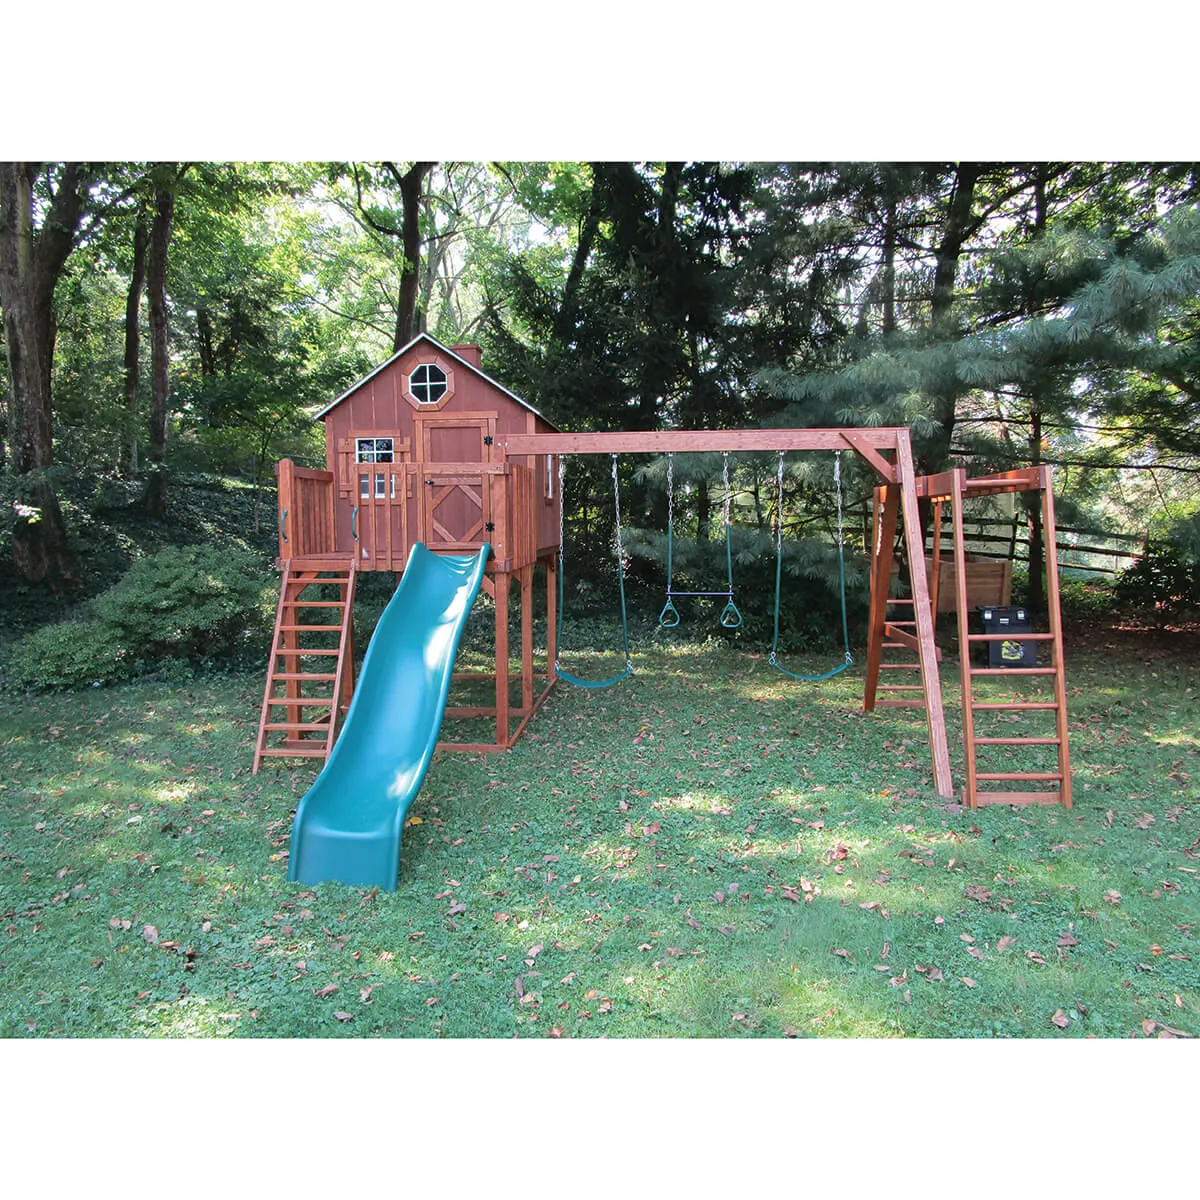 CL#523 Wooden Play Set